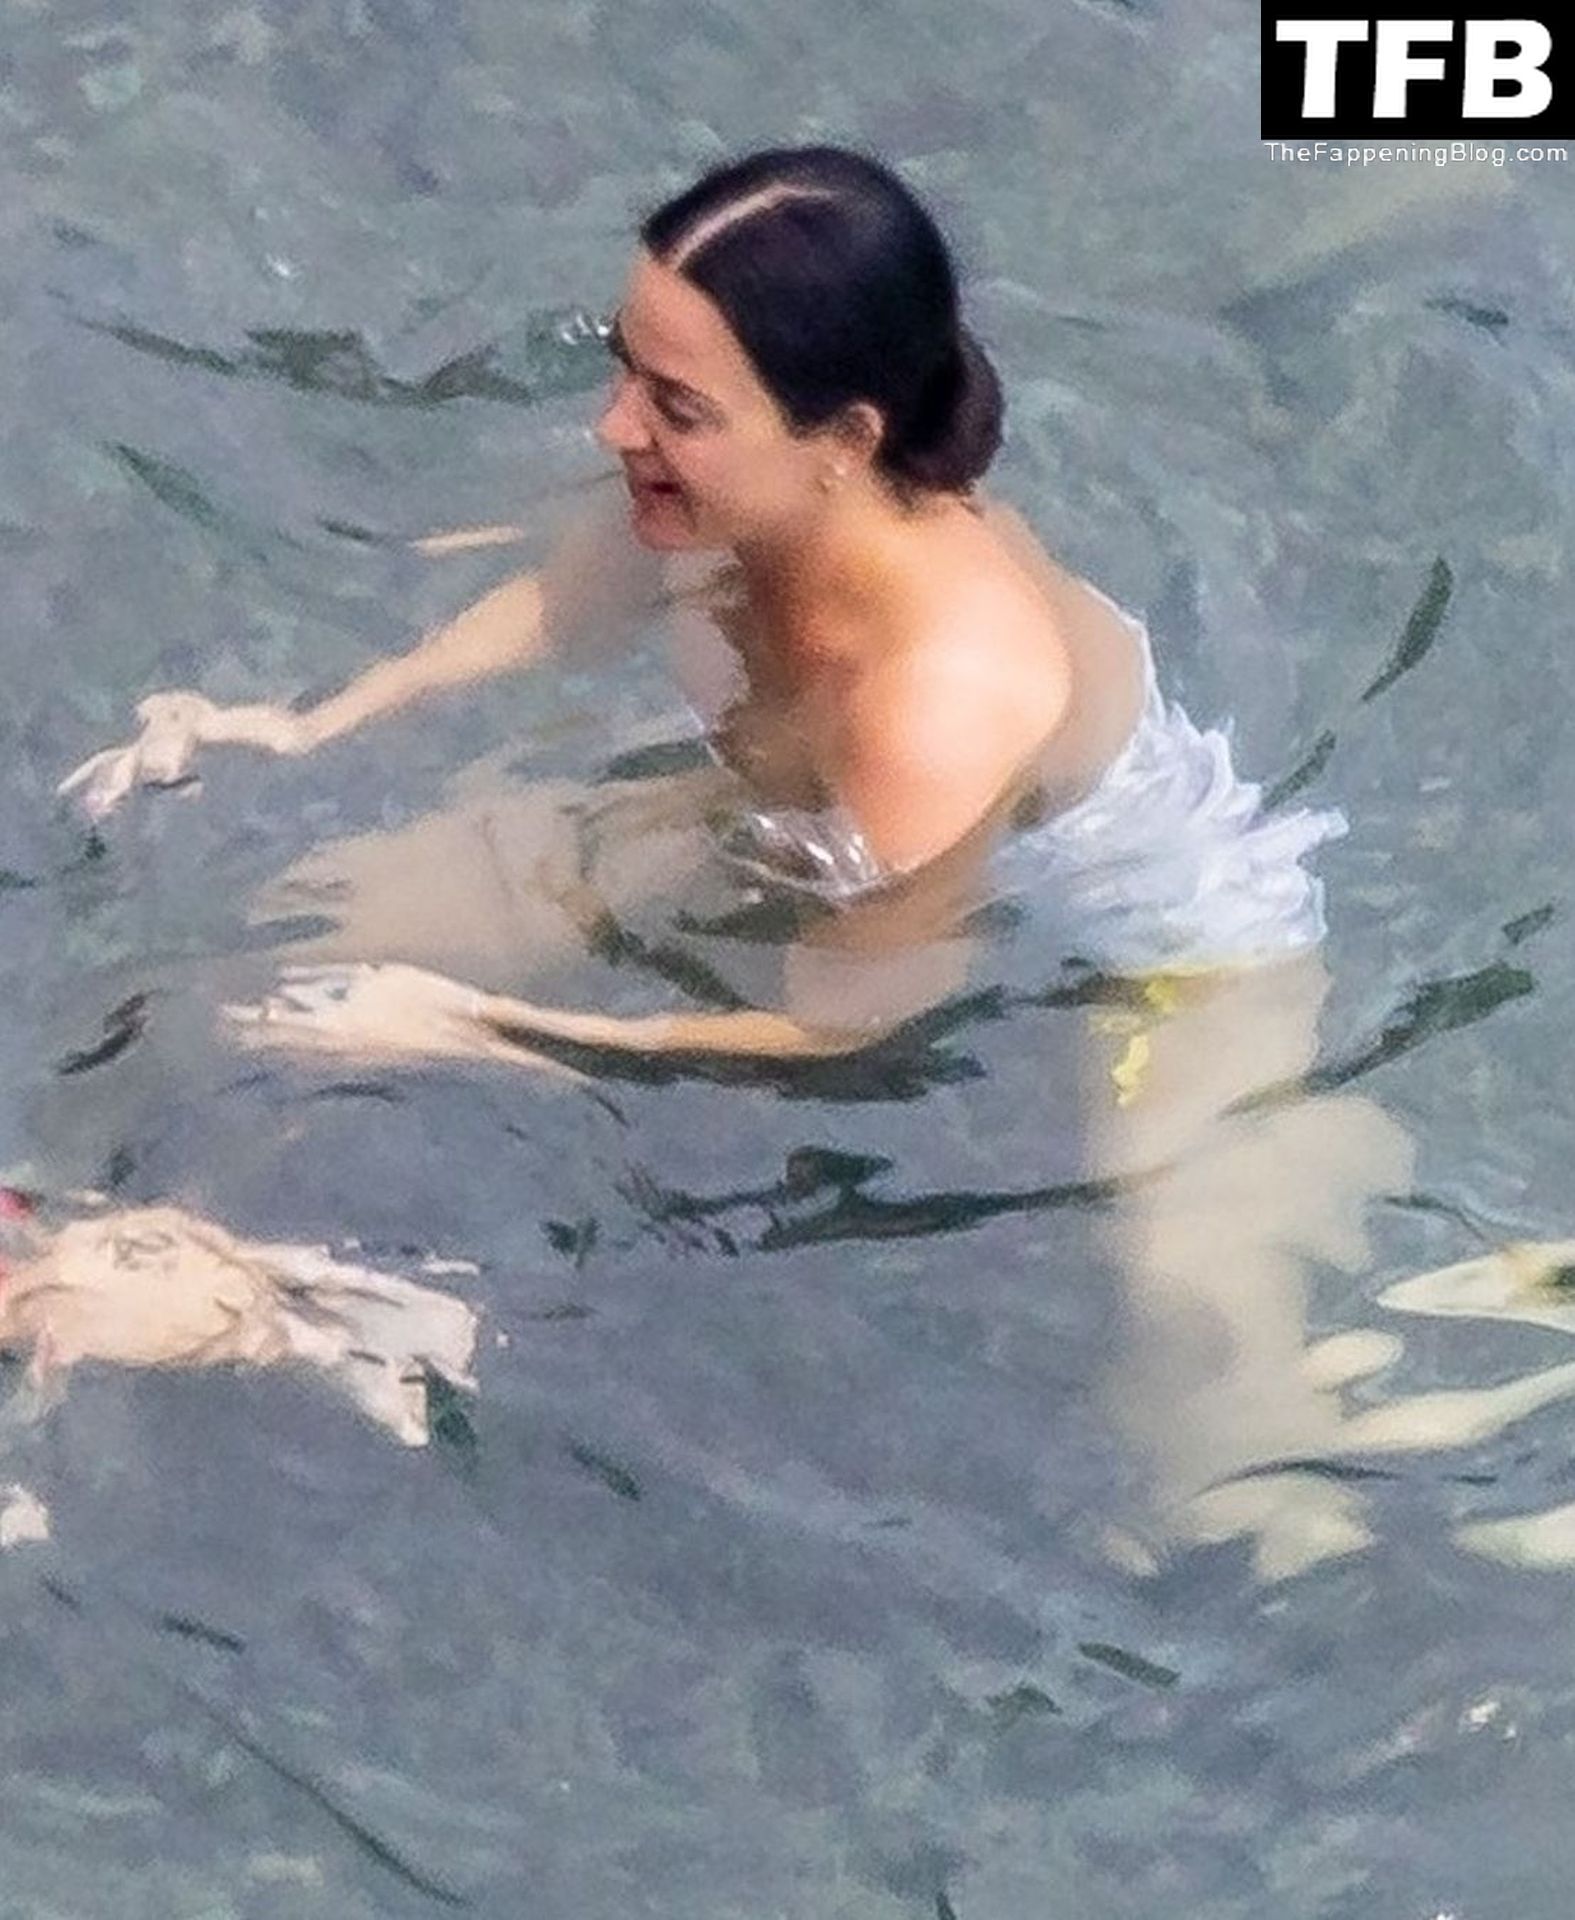 Katy Perry Sexy The Fappening Blog 25 - Katy Perry Rocks a Strapless Swimsuit While Enjoying a Beach Day with Orlando Bloom in Positano (105 Photos)